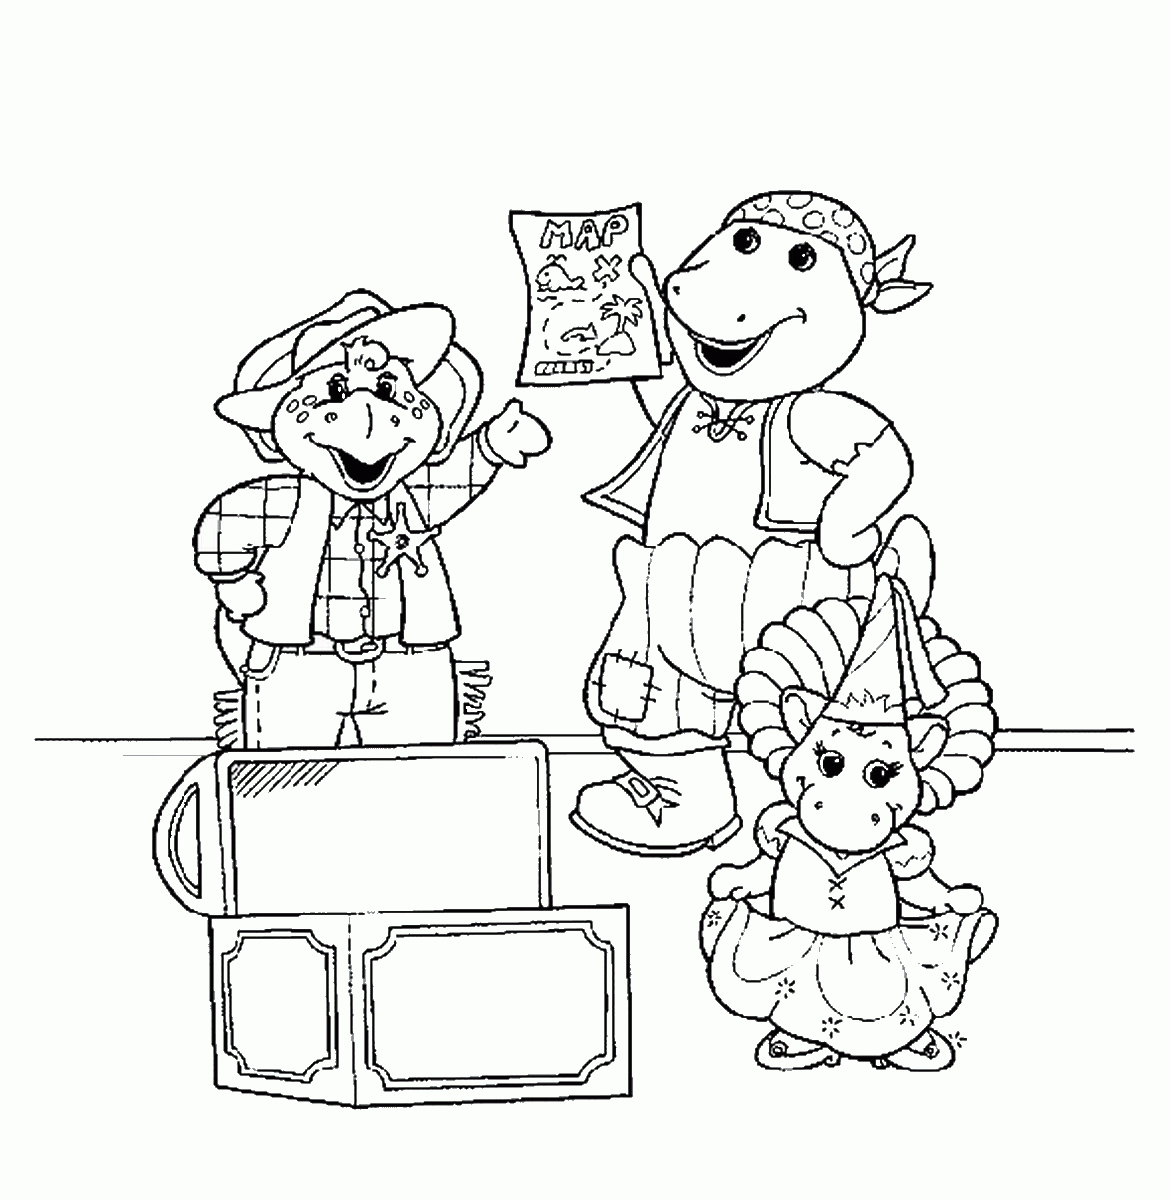 Barney and Friends Coloring Pages TV Film barney_cl_1057 Printable 2020 00630 Coloring4free